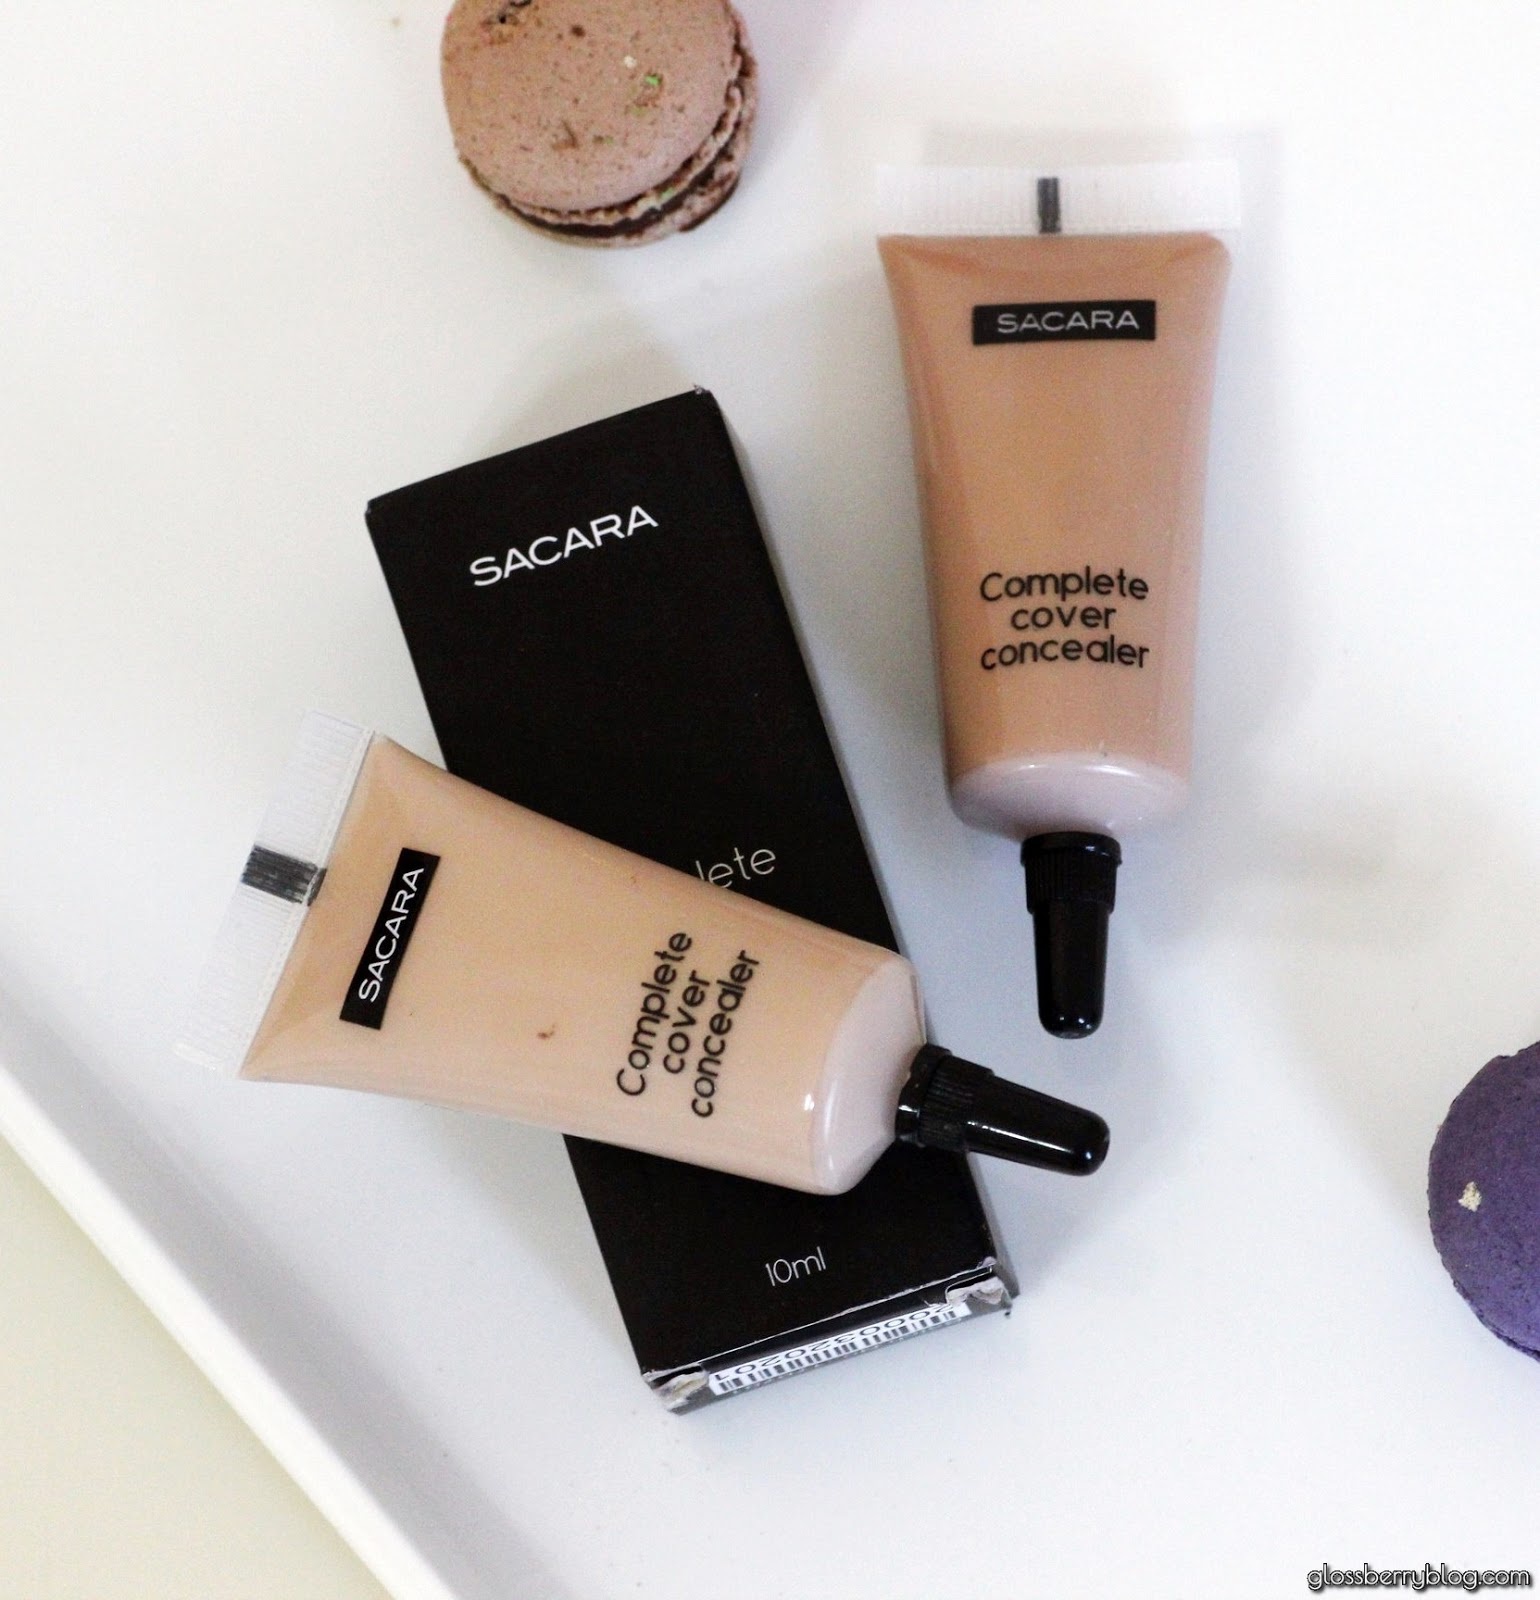 Sacara Complete Cover Concealer